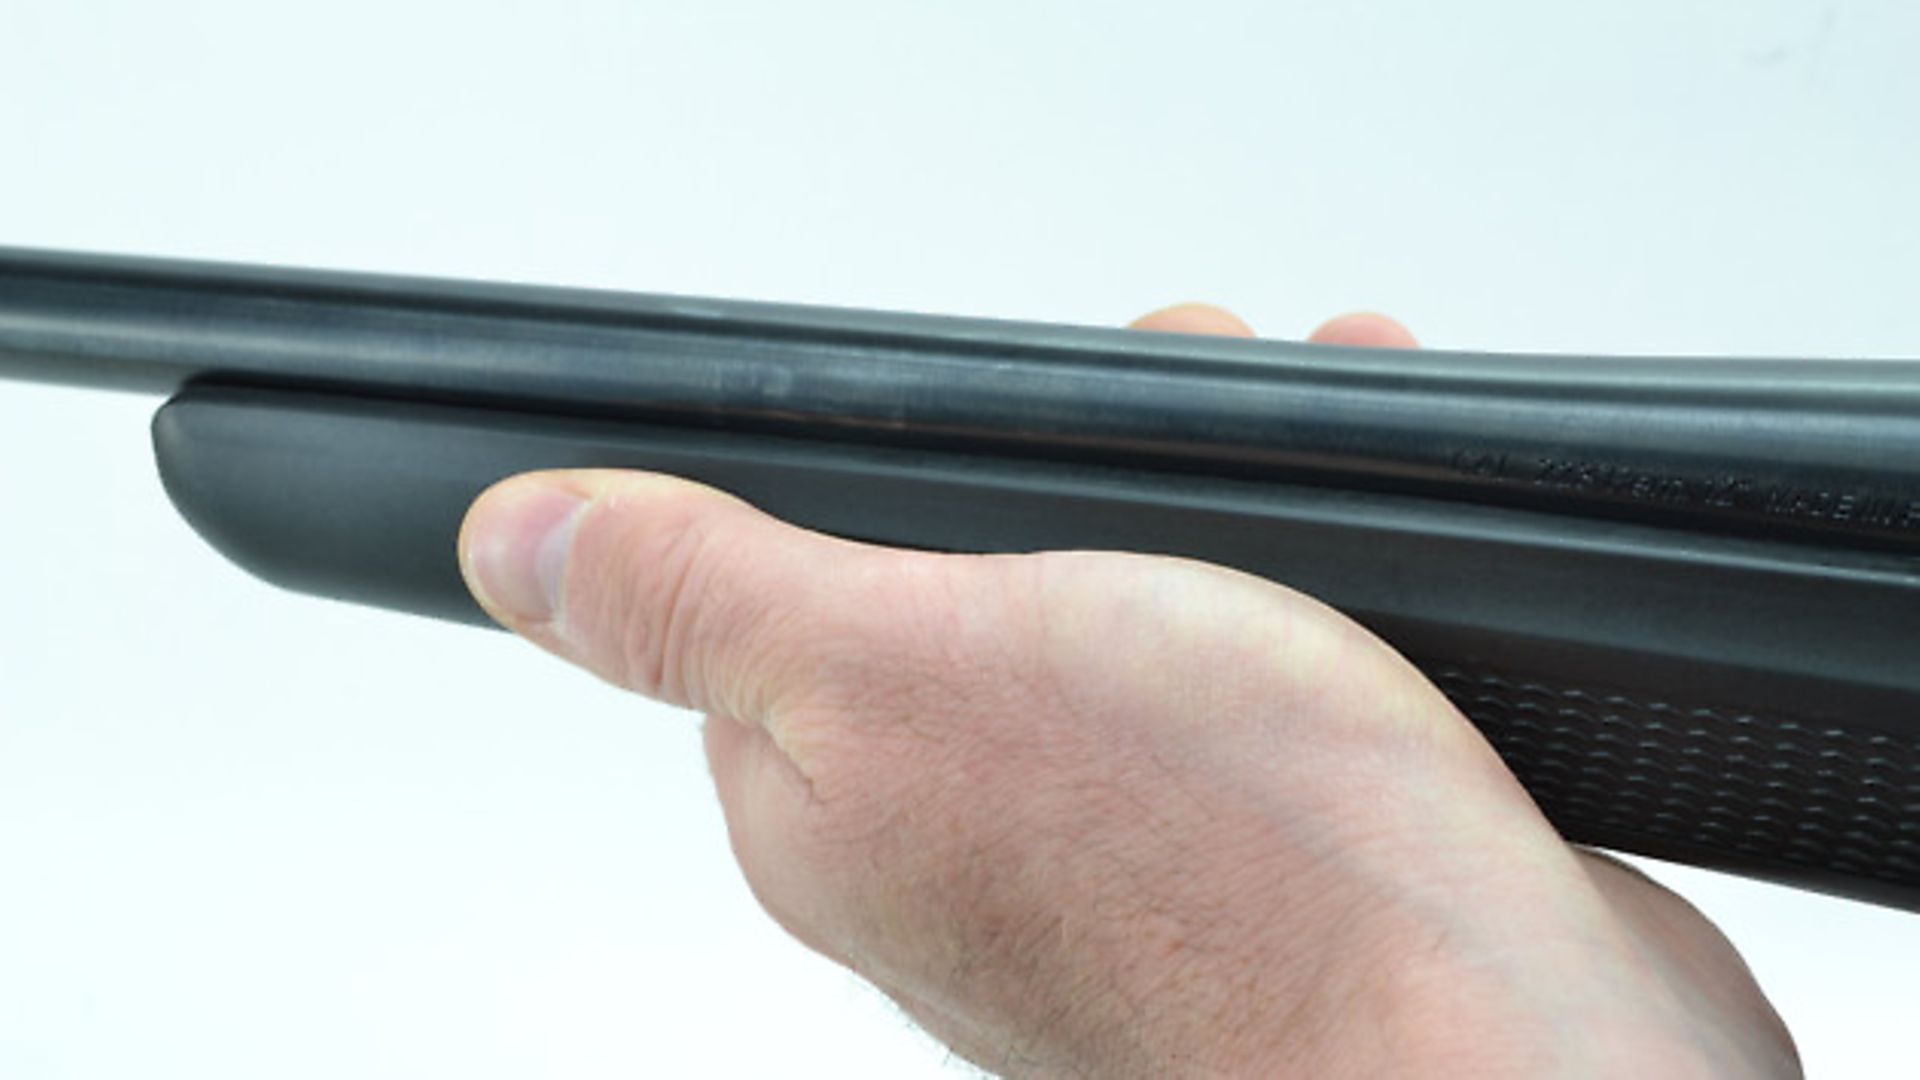 Tikka T3x Lite in 223 Rem - in depth rifle review